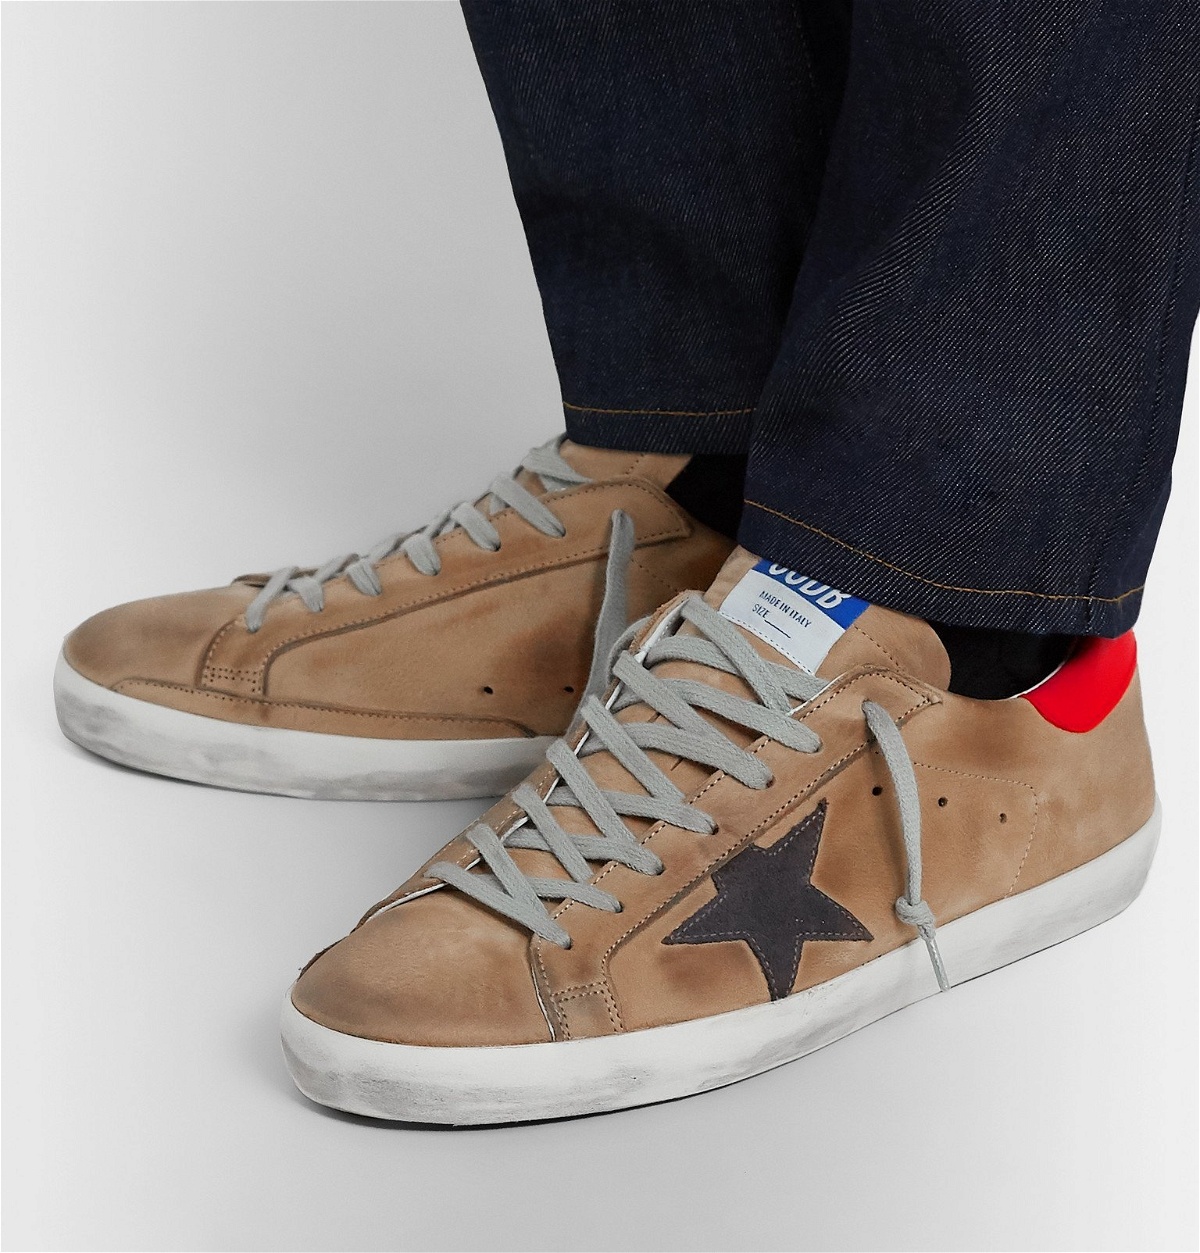 Golden Goose - Superstar Distressed Leather and Suede Sneakers - Brown  Golden Goose Deluxe Brand